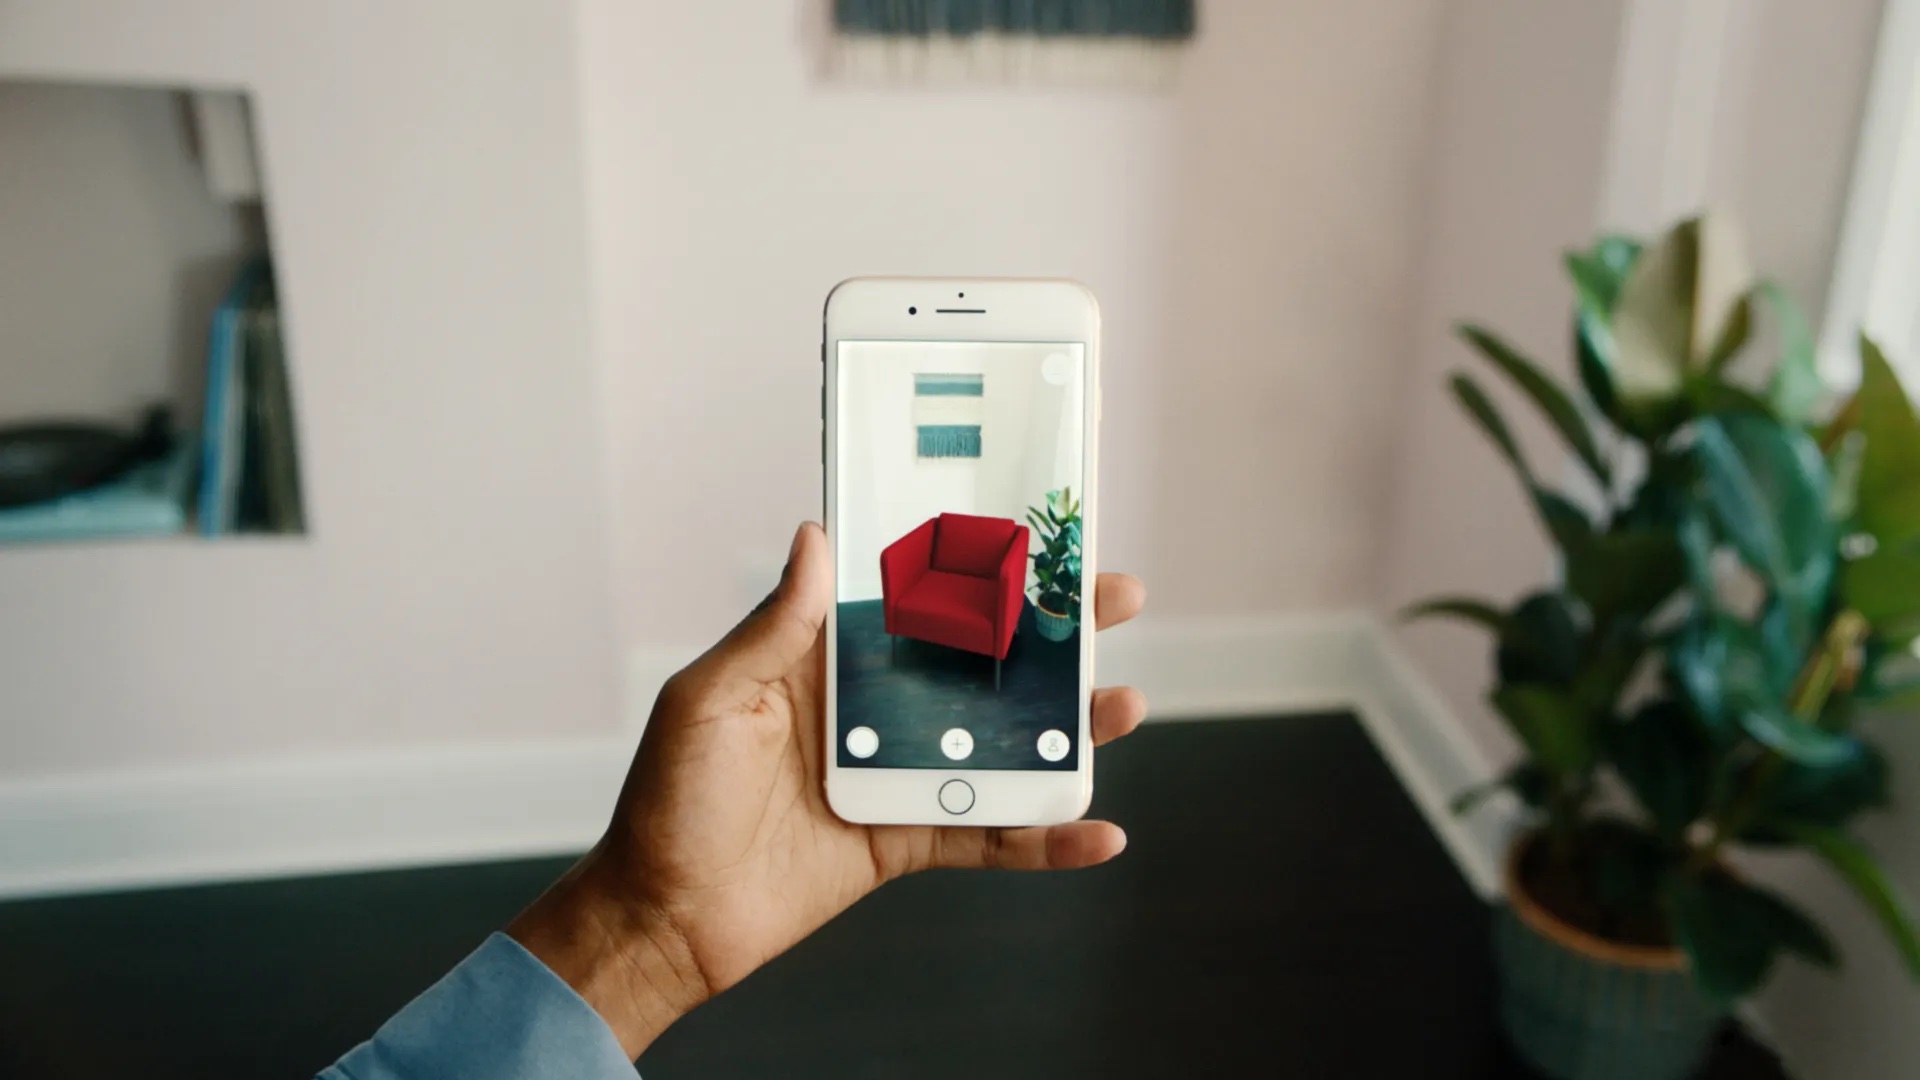 A person's arm holding out their mobile device, pointing at an empty corner of their room. On their device the camera feed is displaying the room, with a 3D model of an armchair visible in the empty space.